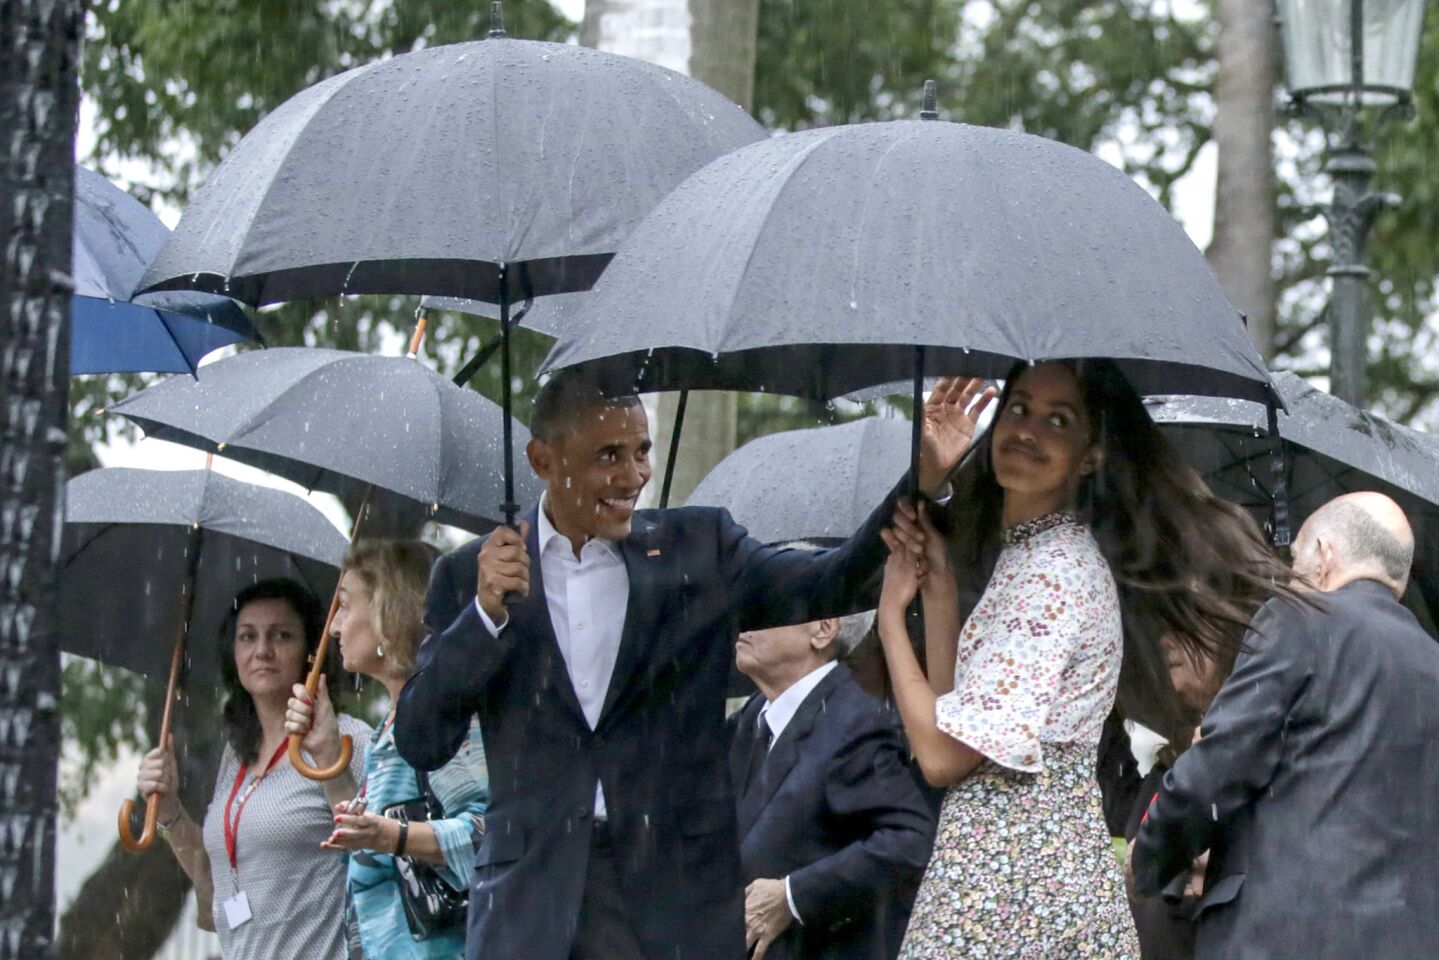 President Barack Obama, along with his daughter, waves to well wishers as he tours Old Havana with his family soon after touching down on Air Force One, becoming the first sitting President since Calvin Coolidge to visit Cuba.